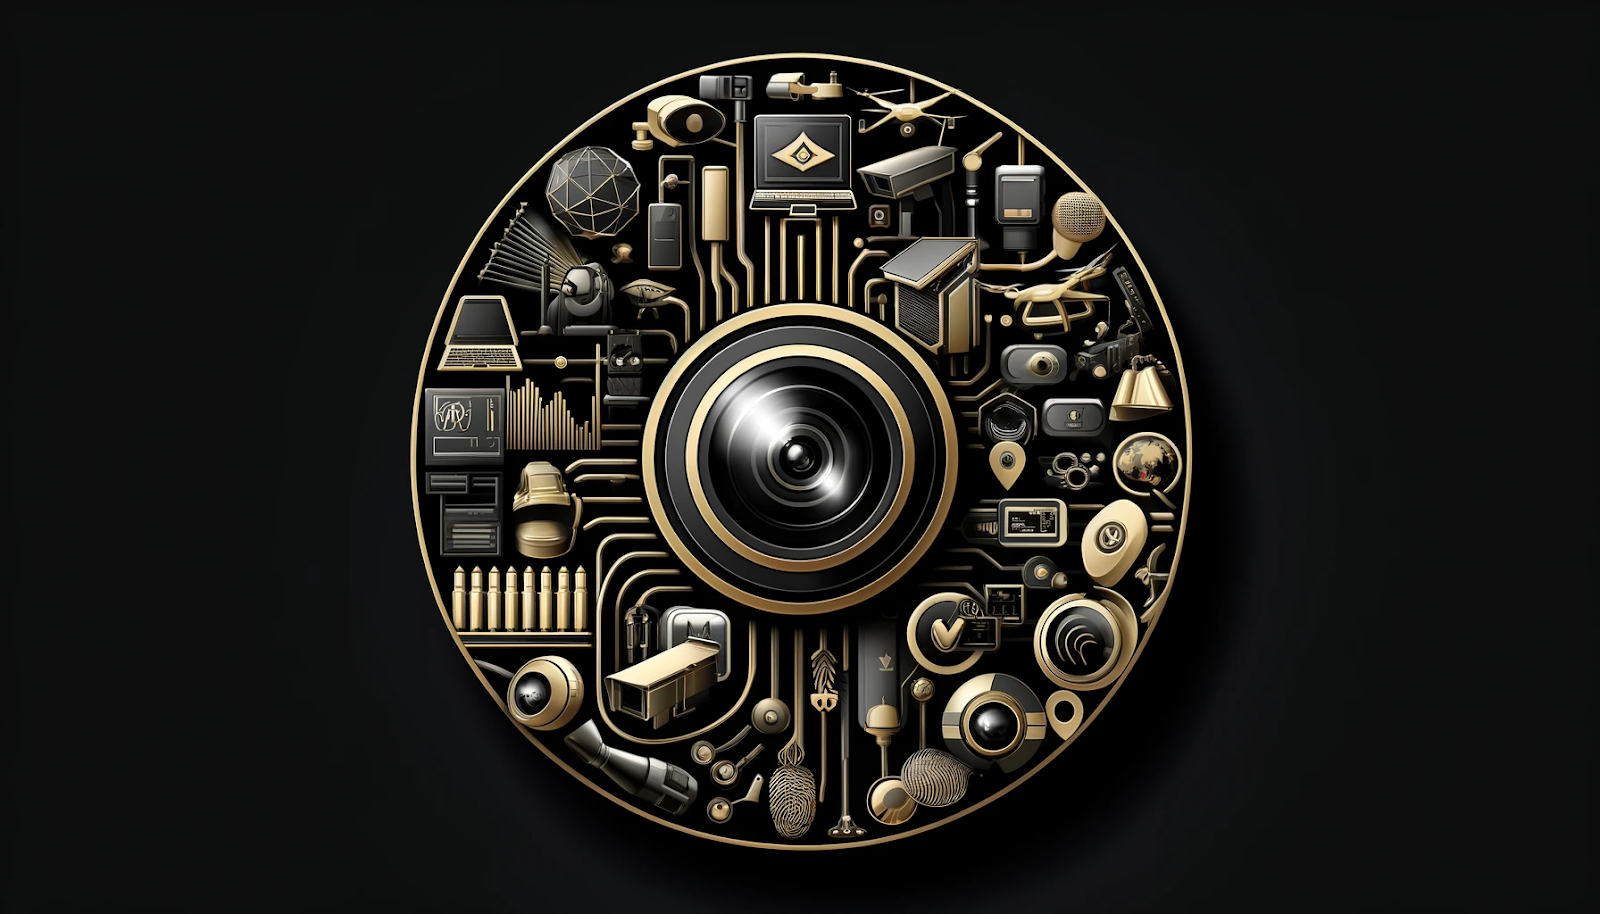 Symbolic representation of modern event security technology featuring surveillance cameras, drones, and biometric systems in black and gold.